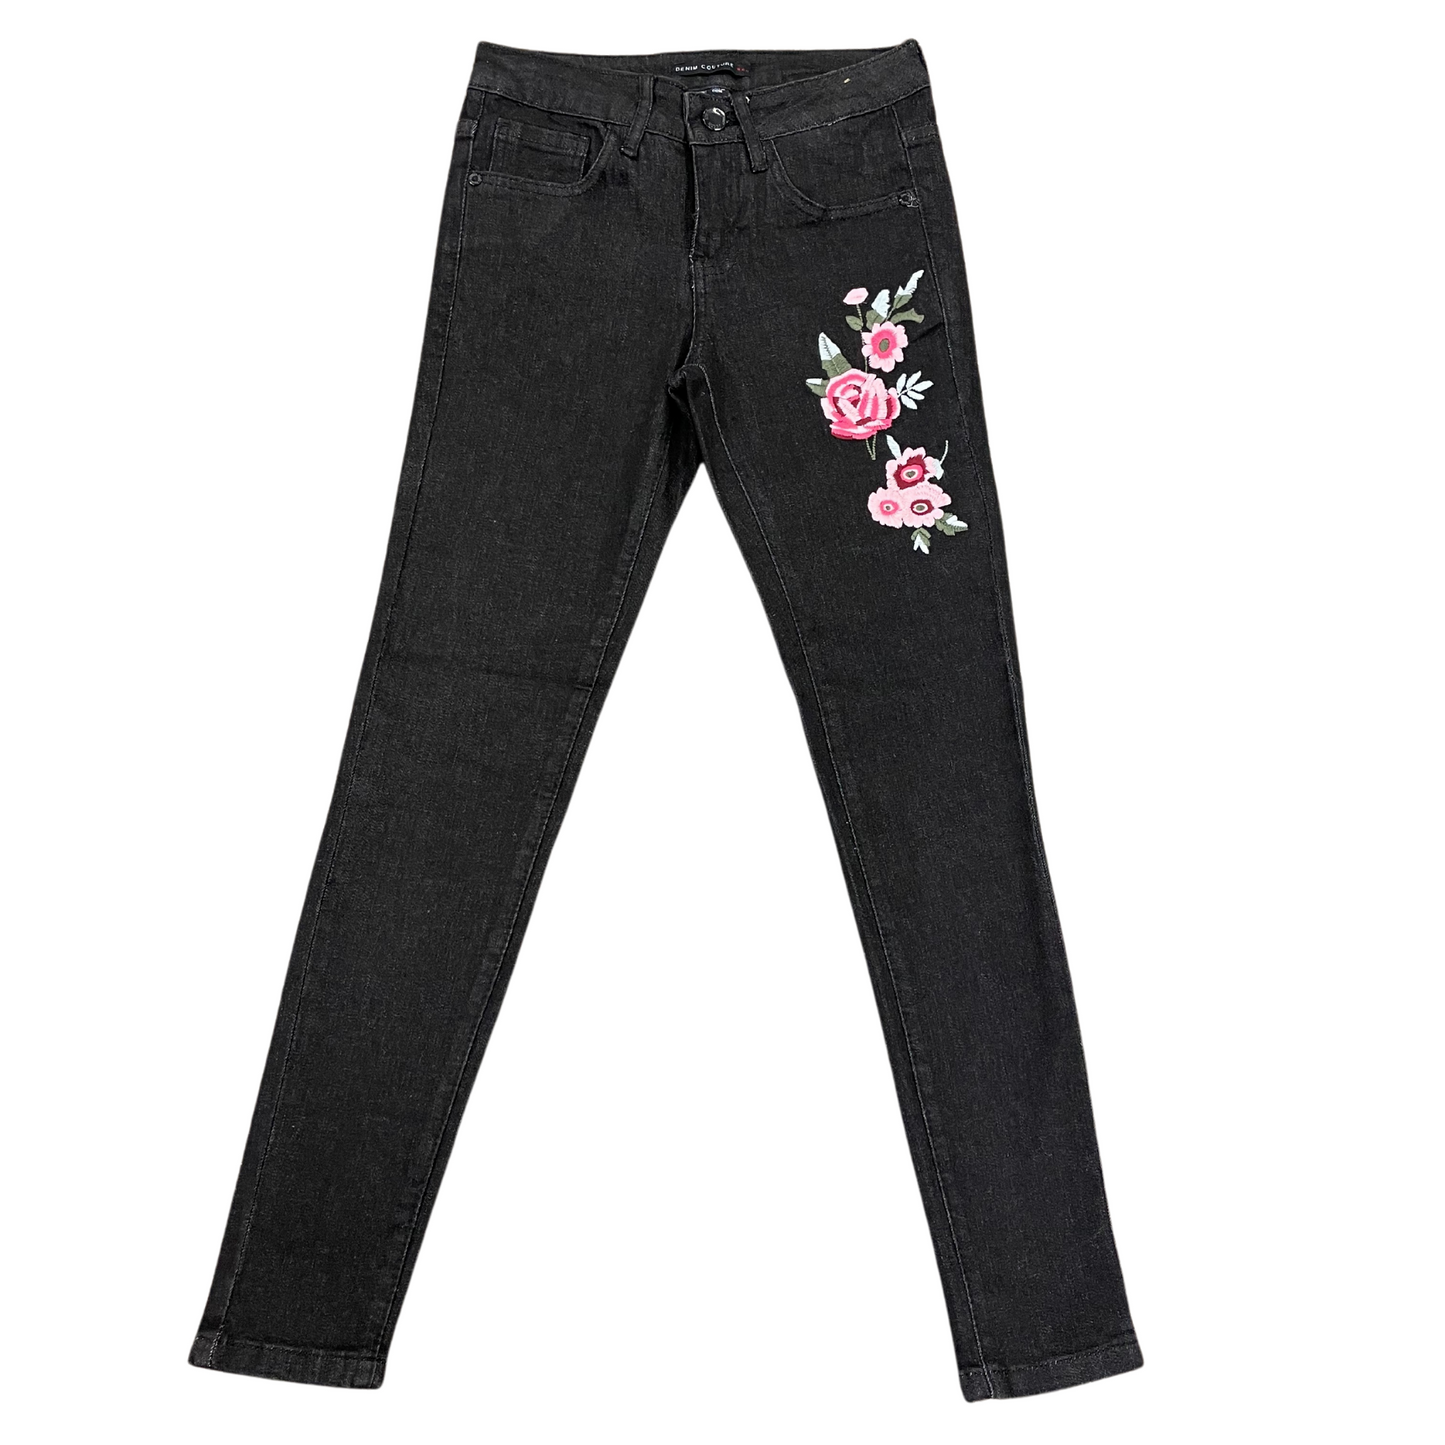 Denim Couture Classic Skinny Jeans Embroidered Floral Patch (0-15)